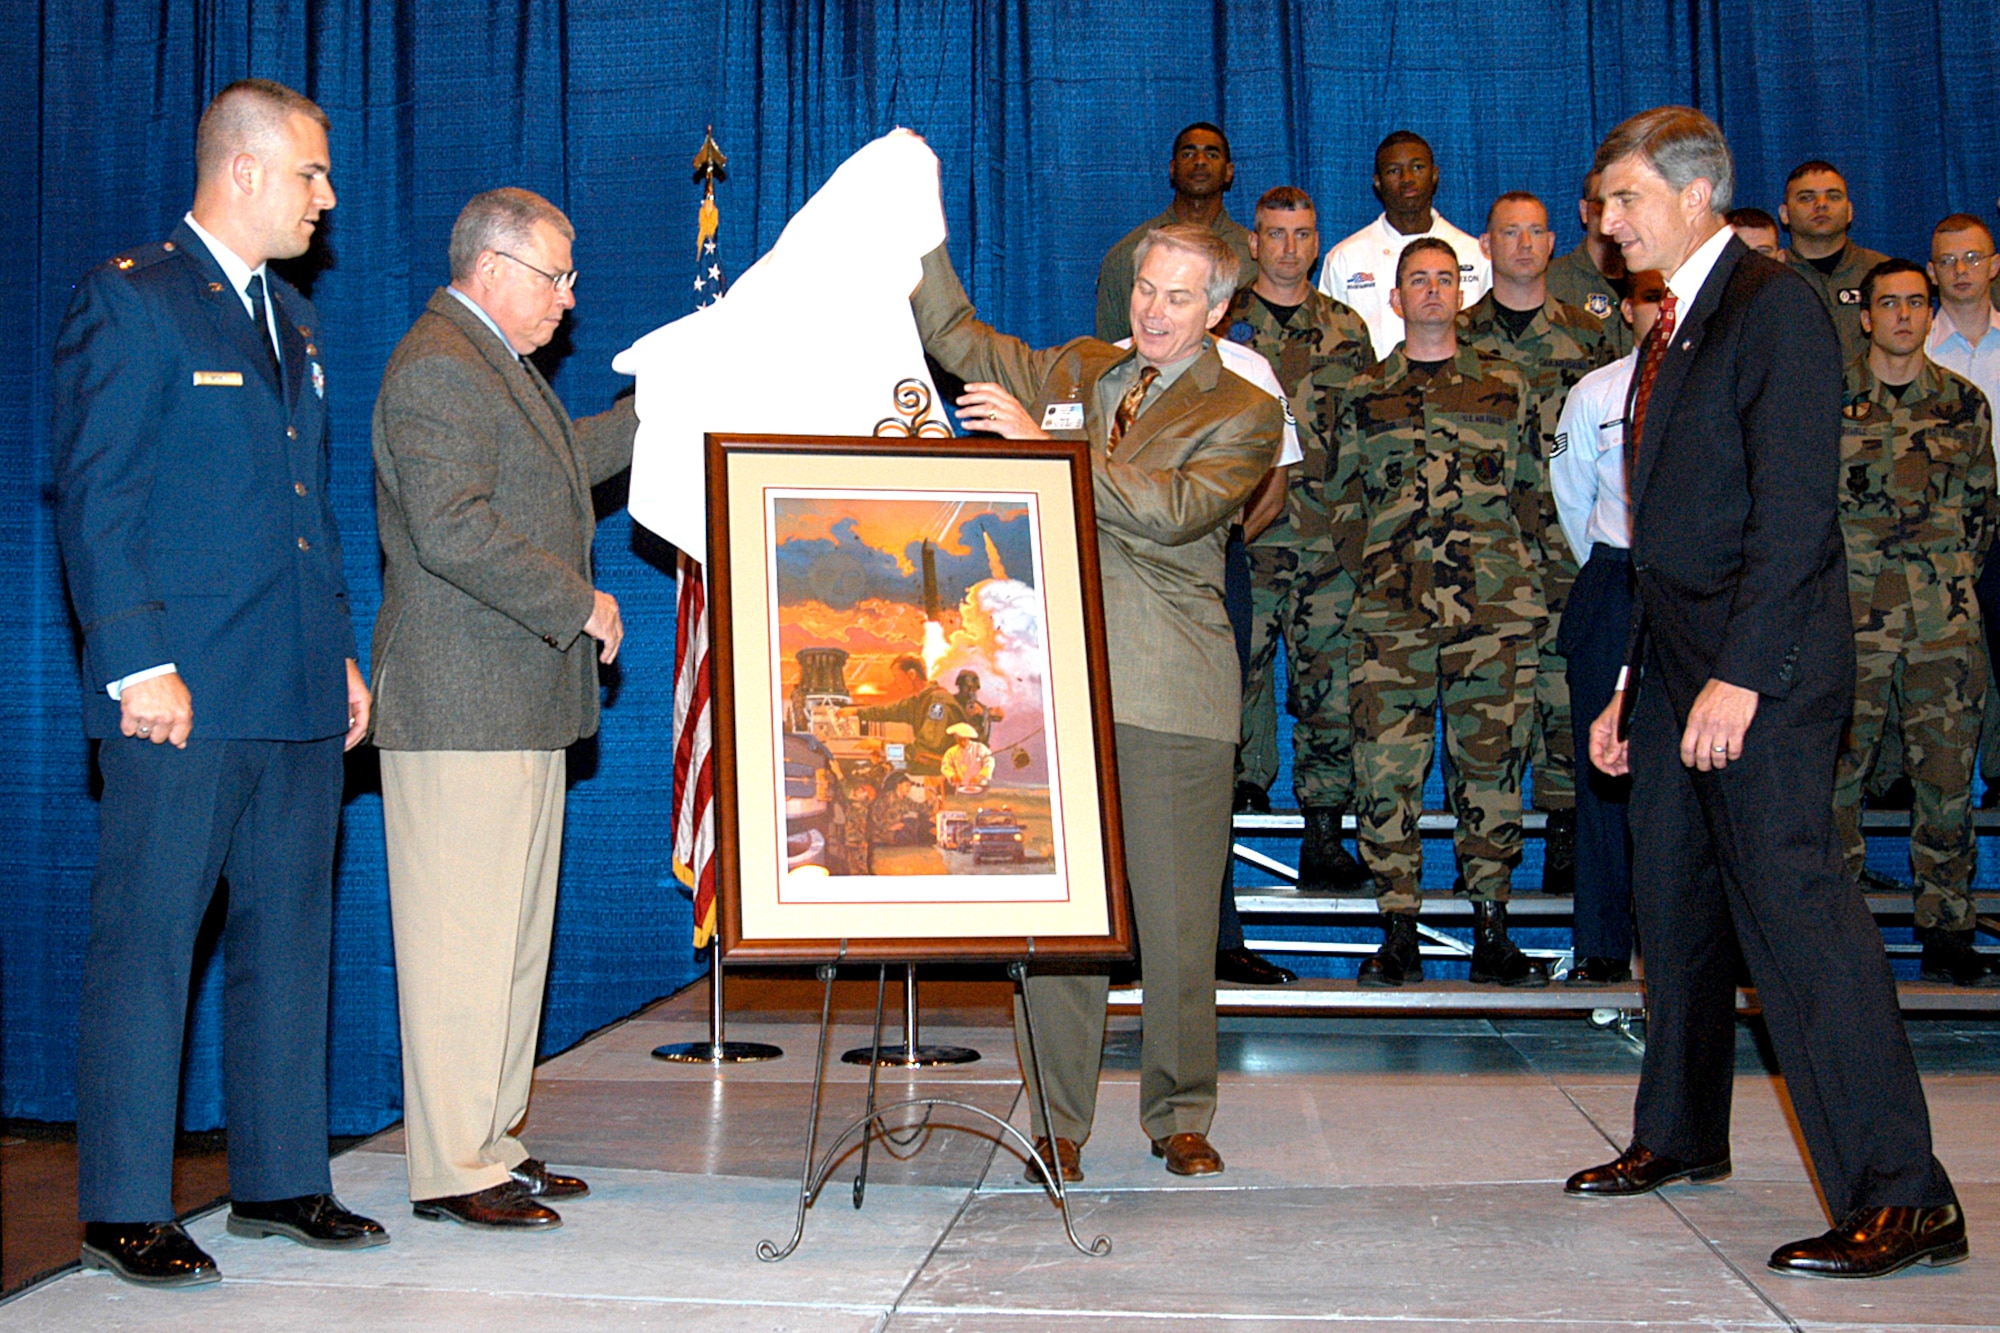 F.E. WARREN AIR FORCE BASE, Wyo. -- (From left) Capt. Warren Neary, retired Col. Roscoe Moulthrop and retired Maj. Gen. Jerry Perryman present a painting to Dr. Ronald Sega during the Peacekeeper missile deactivation ceremony Sept. 19.  The painting is a montage of the people who carried out the Peacekeeper mission throughout its 19-year history.  Dr. Sega is the undersecretary of the Air Force.  (U.S. Air Force photo by Liz Saucier) 